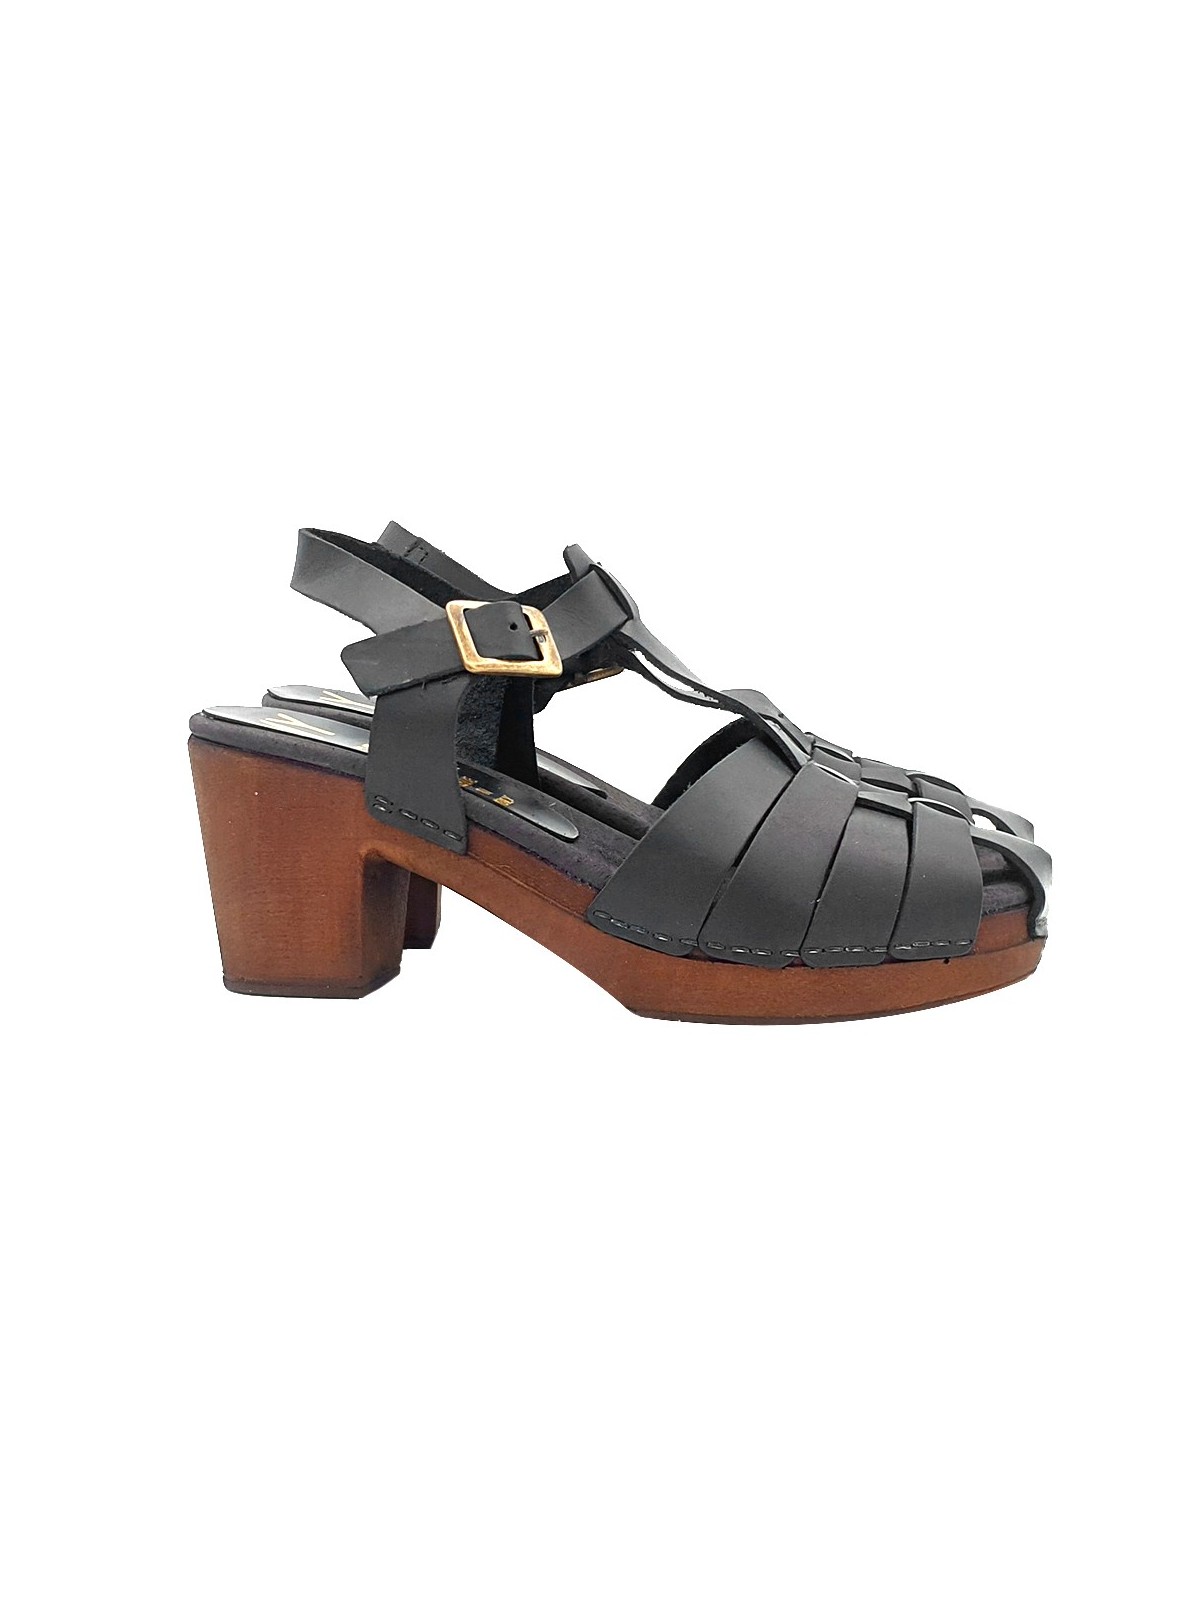 BLACK LEATHER SANDALS WITH STRAP HEEL 7 cm